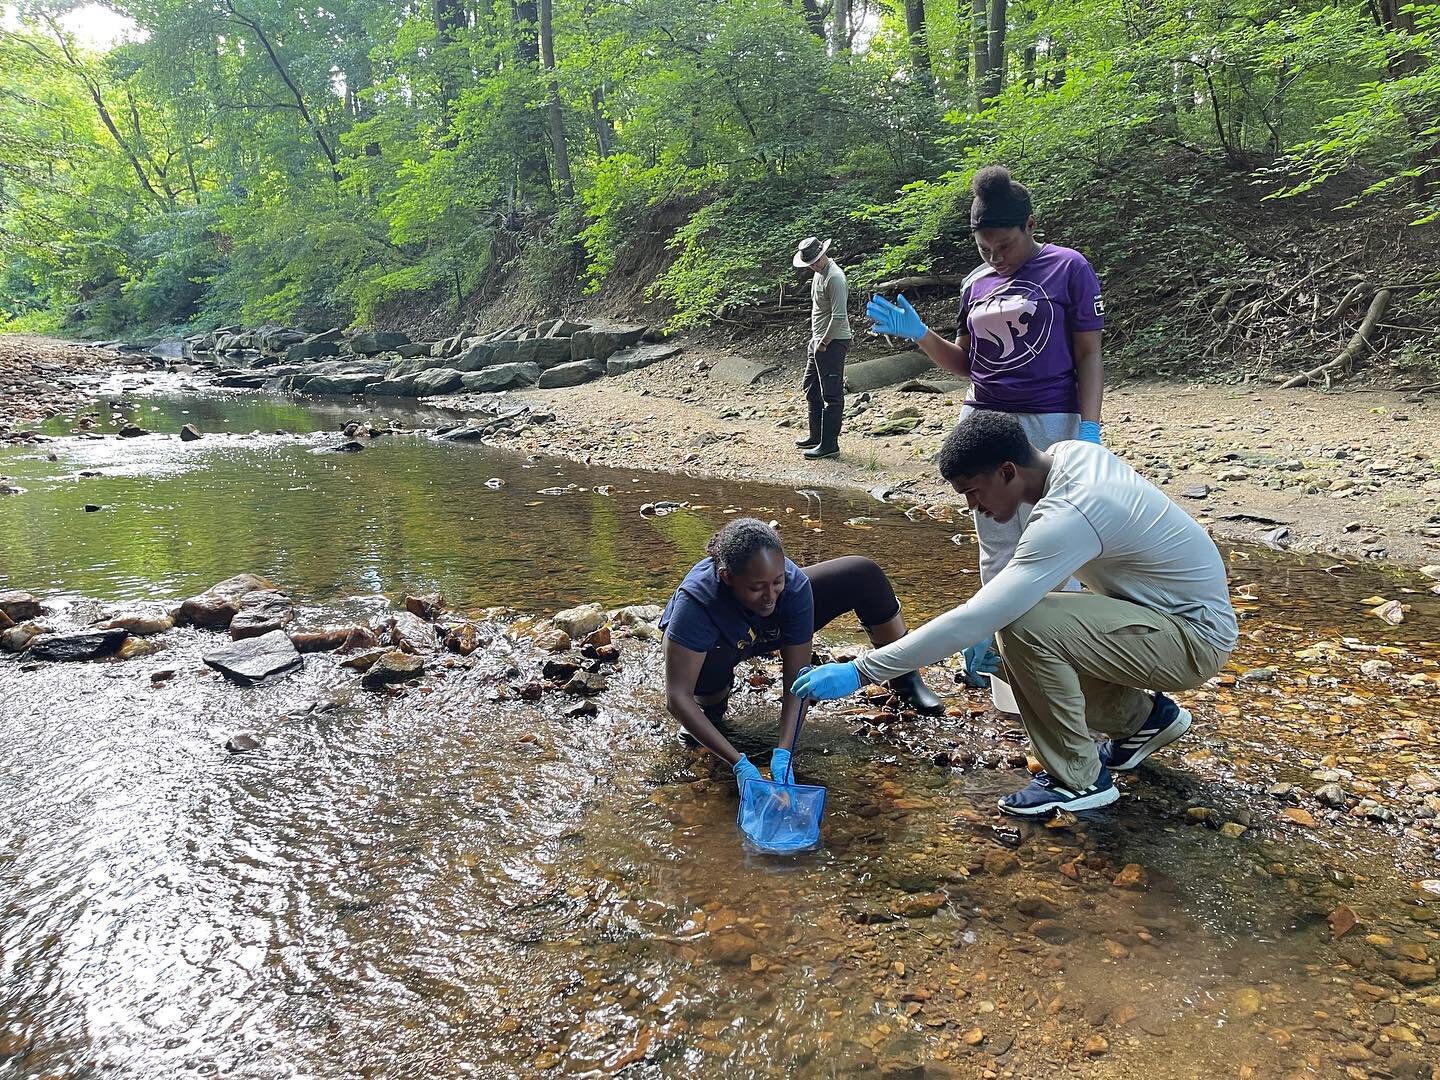 It&rsquo;s week 3 of the Rock Creek Conservation Corps (RC3) - here&rsquo;s a quick check in on what the crews have been up to:&nbsp;
🔎Macroinvertebrate surveys and stream assessments&nbsp;
💪 Invasive removals
🧠Learning about green infrastructure 